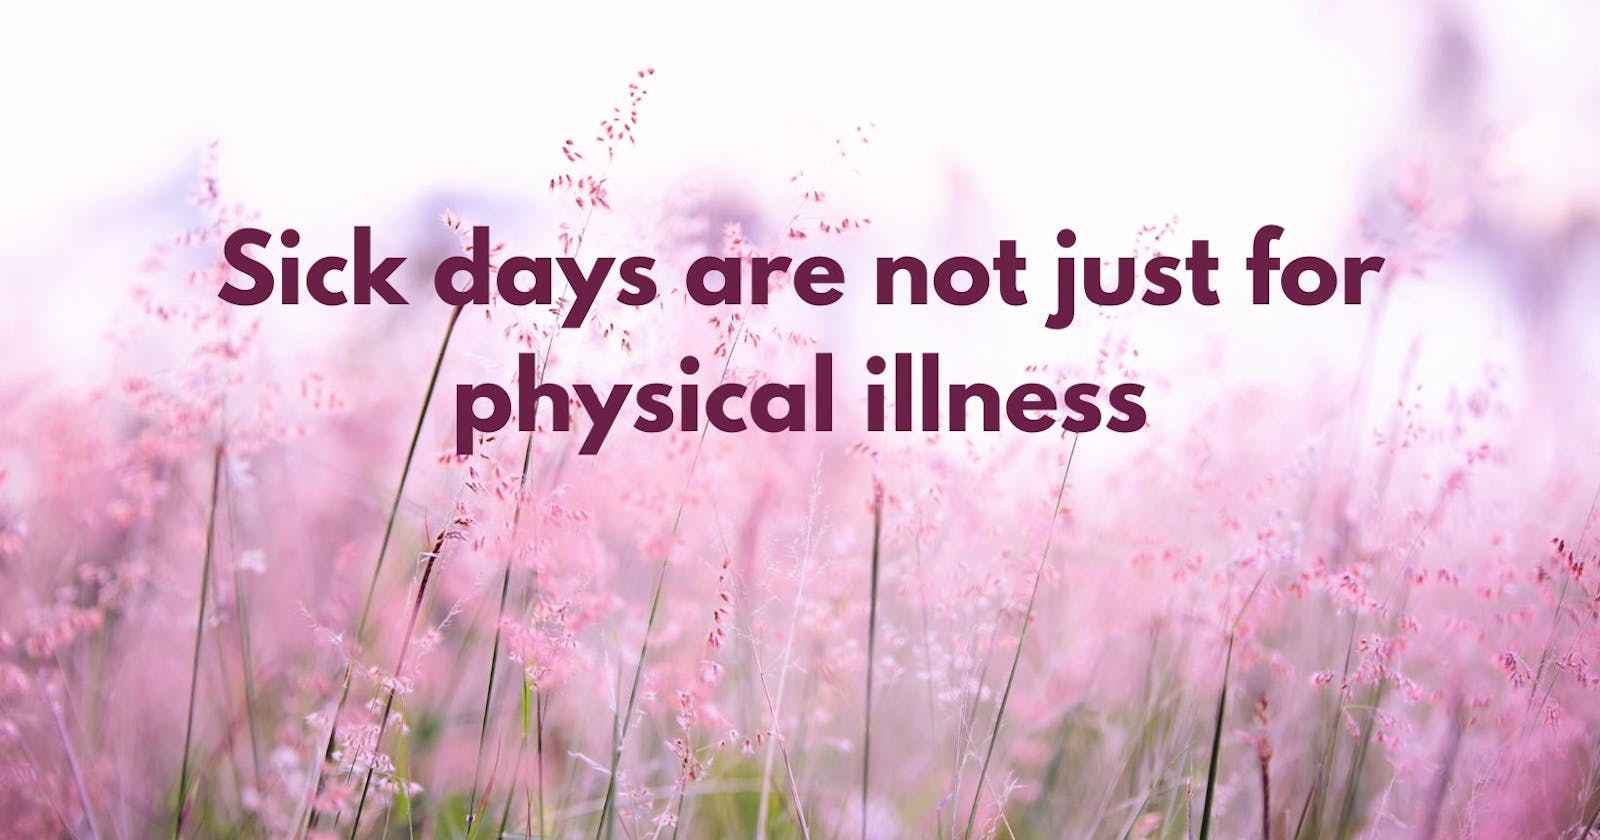 Sick days are not just for physical illness